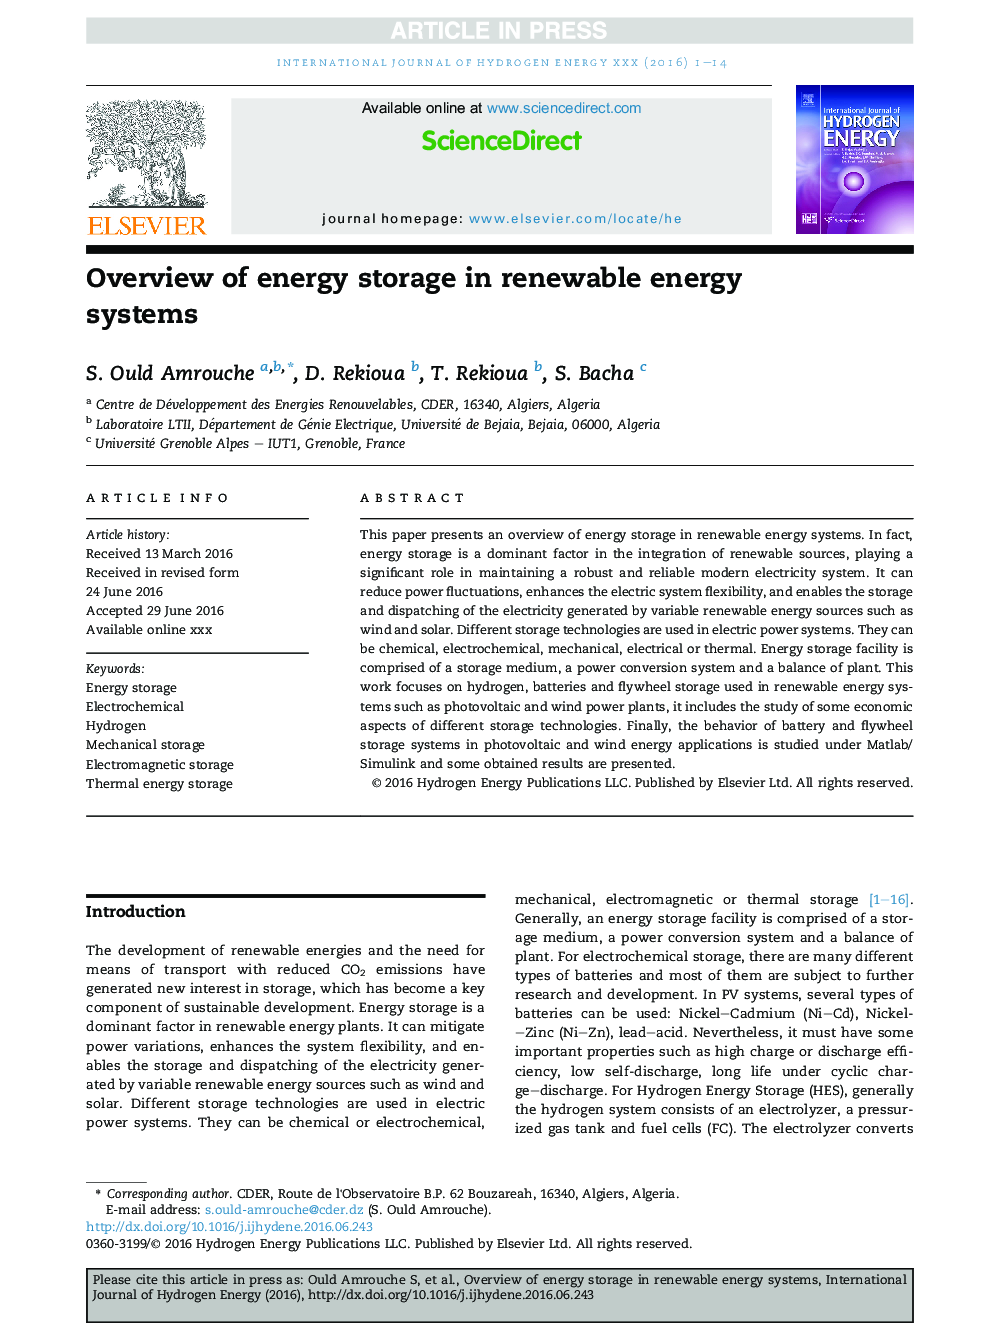 Overview of energy storage in renewable energy systems